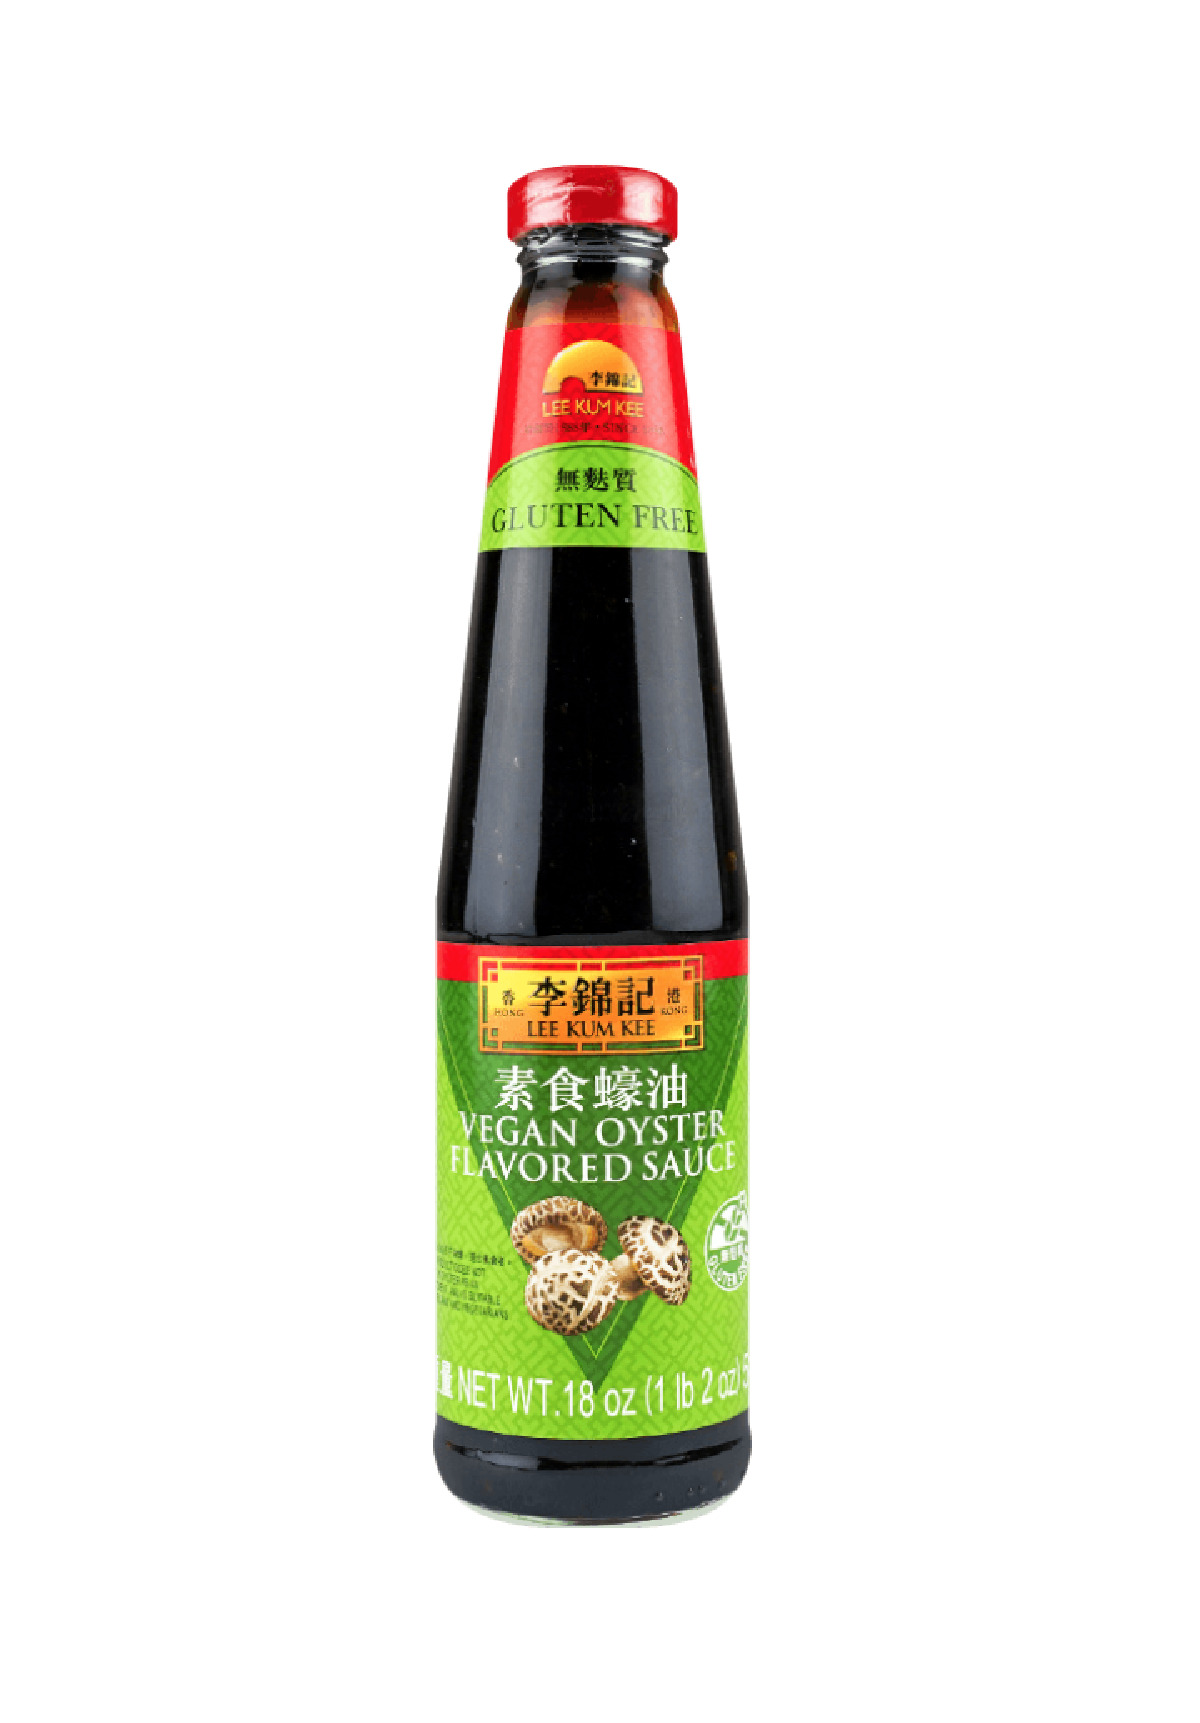 A tall glass bottle with green and red label of Lee Kum Kee vegan and gluten free oyster sauce against a white background. 